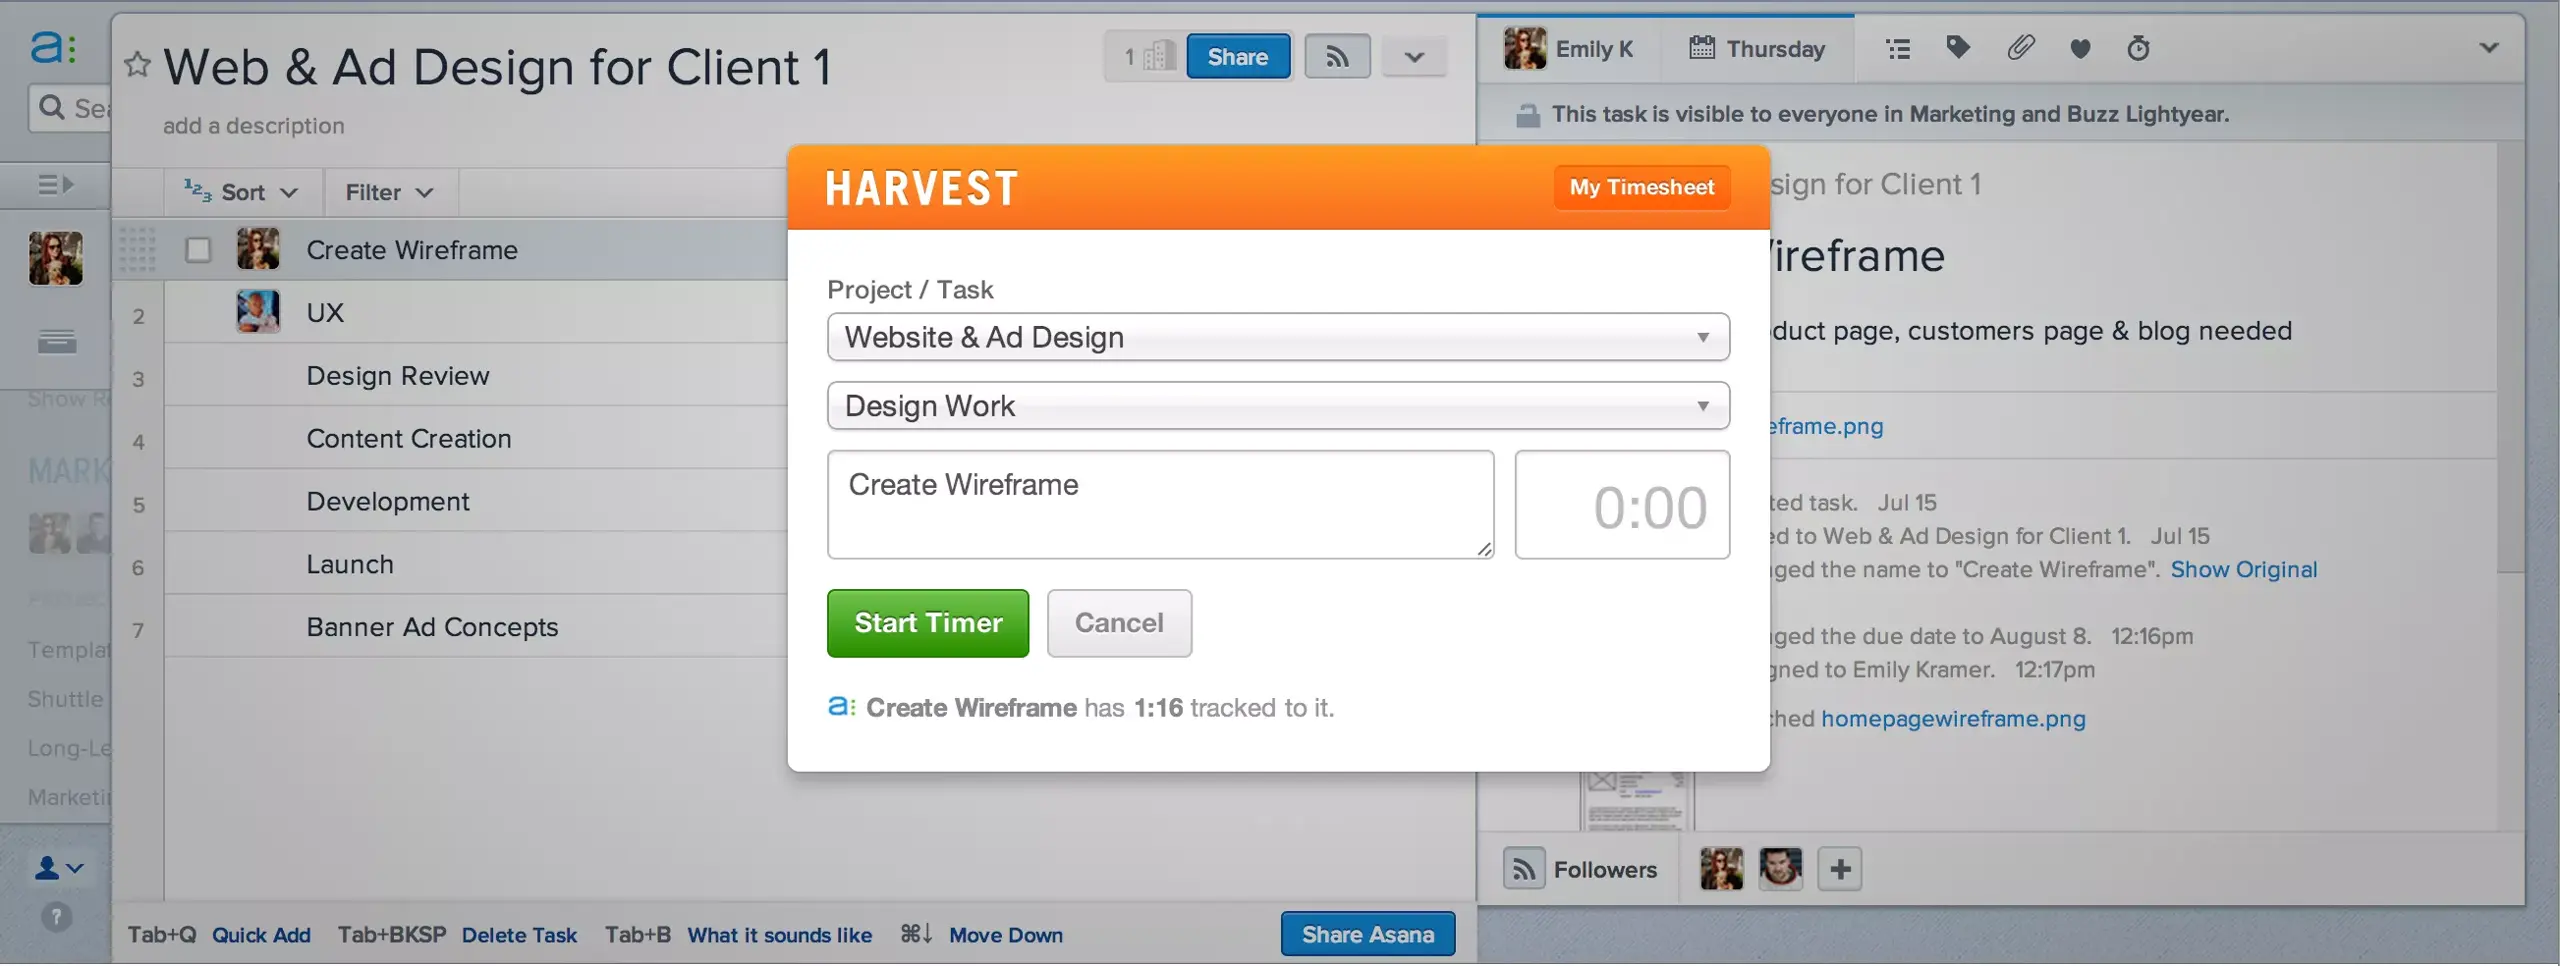 A timely integration: time tracking in Asana with Harvest article banner image